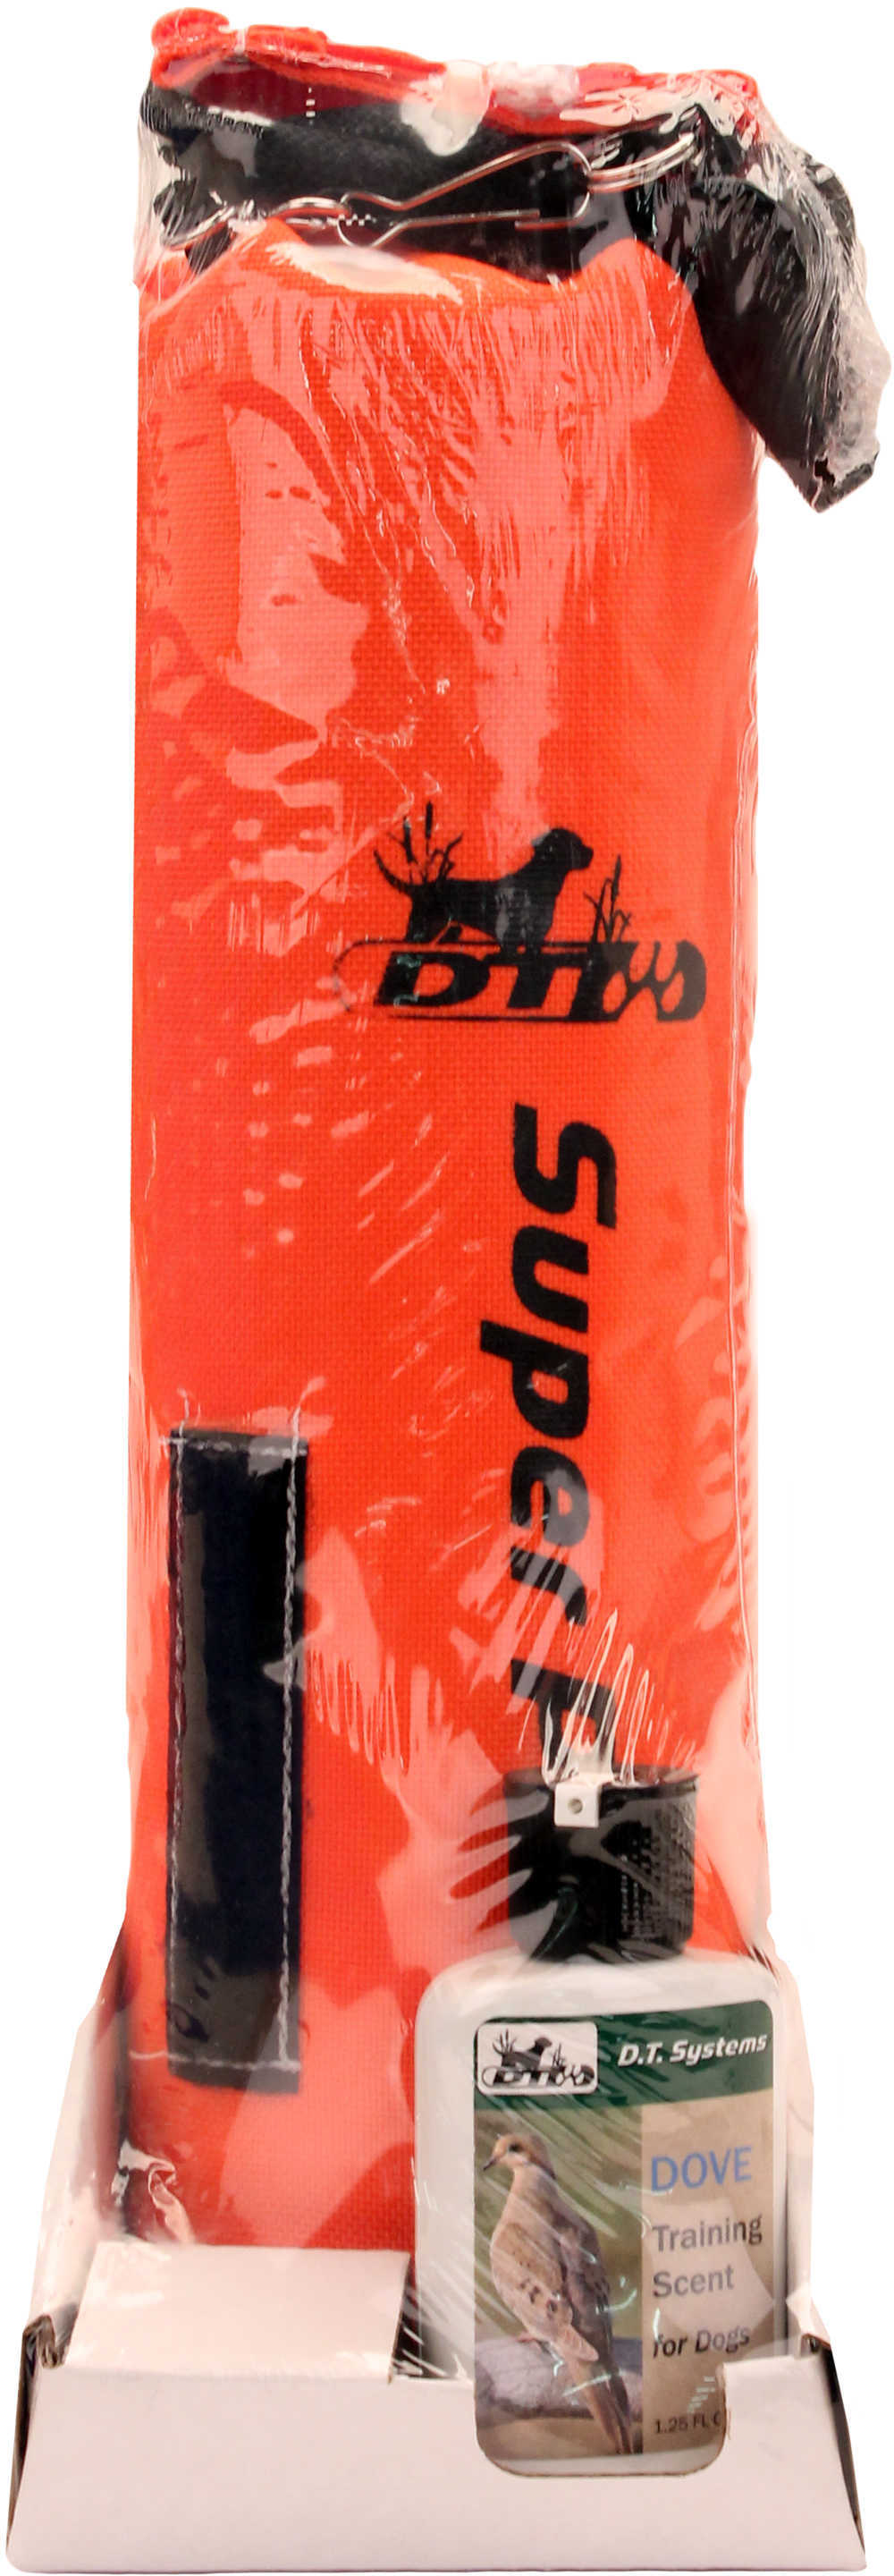 DT Systems Nylon Orange Dummy with Scent Dove Md: 73206